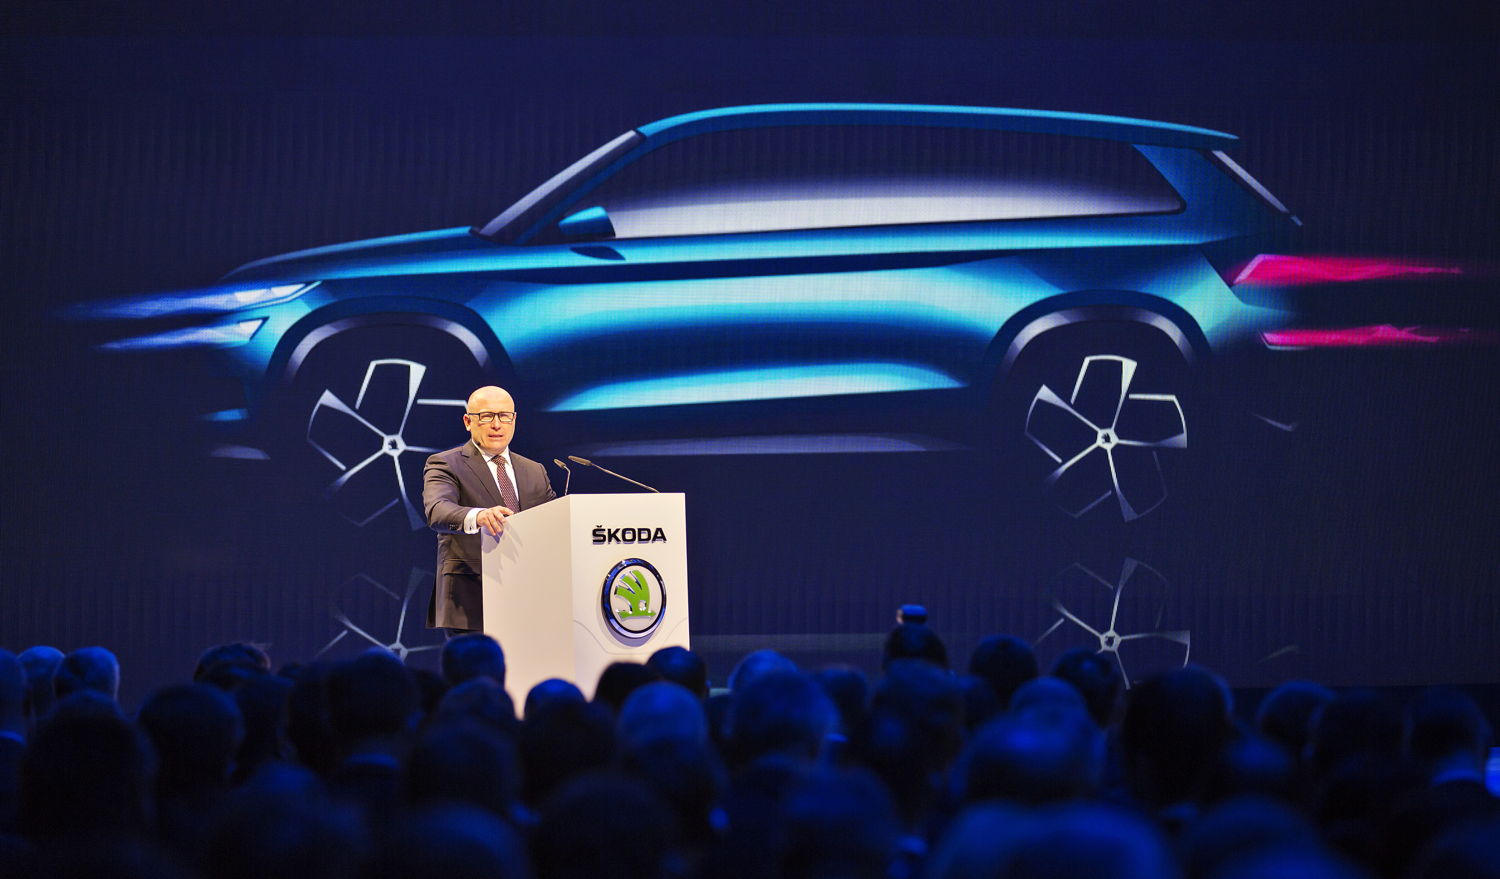 ŠKODA CEO Bernhard Maier is optimistic about the future: ŠKODA is entering the next phase of the model campaign with their new SUV, which will be presented at the Paris Motor Show in autumn.